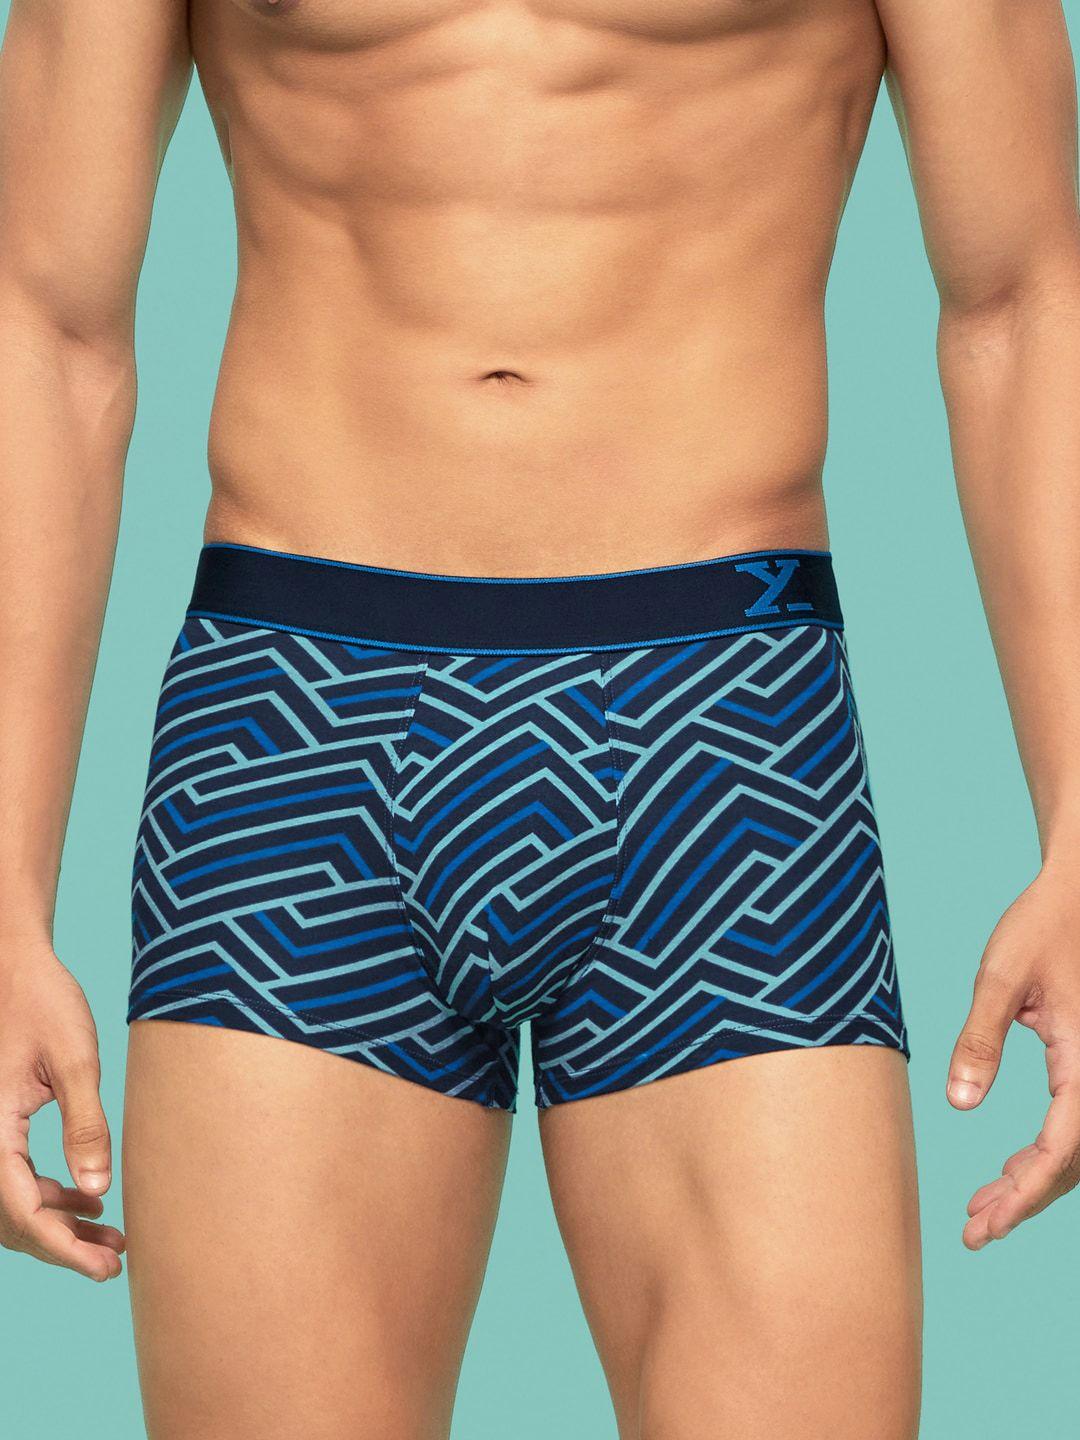 xyxx-men-abstract-printed-cotton-breathable-trunks-xytrnk207